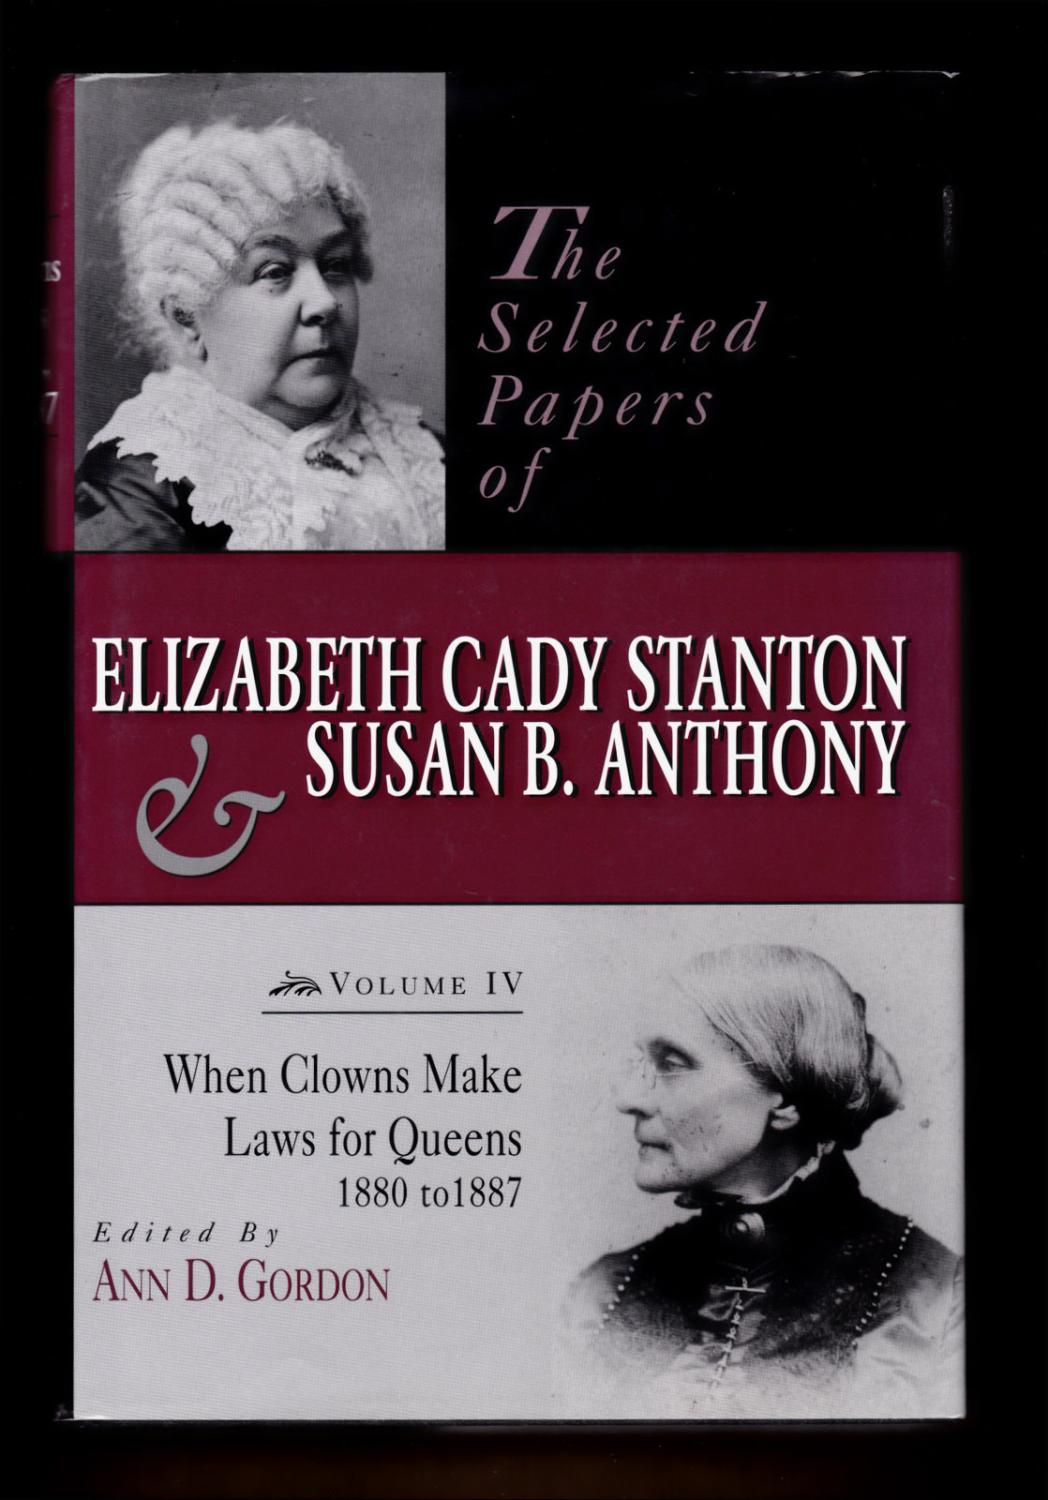 The Selected Papers of Elizabeth Cady Stanton and Susan B. Anthony, Volume IV: When Clowns Make Laws for Queens, 1880 to 1887 - Ann D. Gordon [editor]